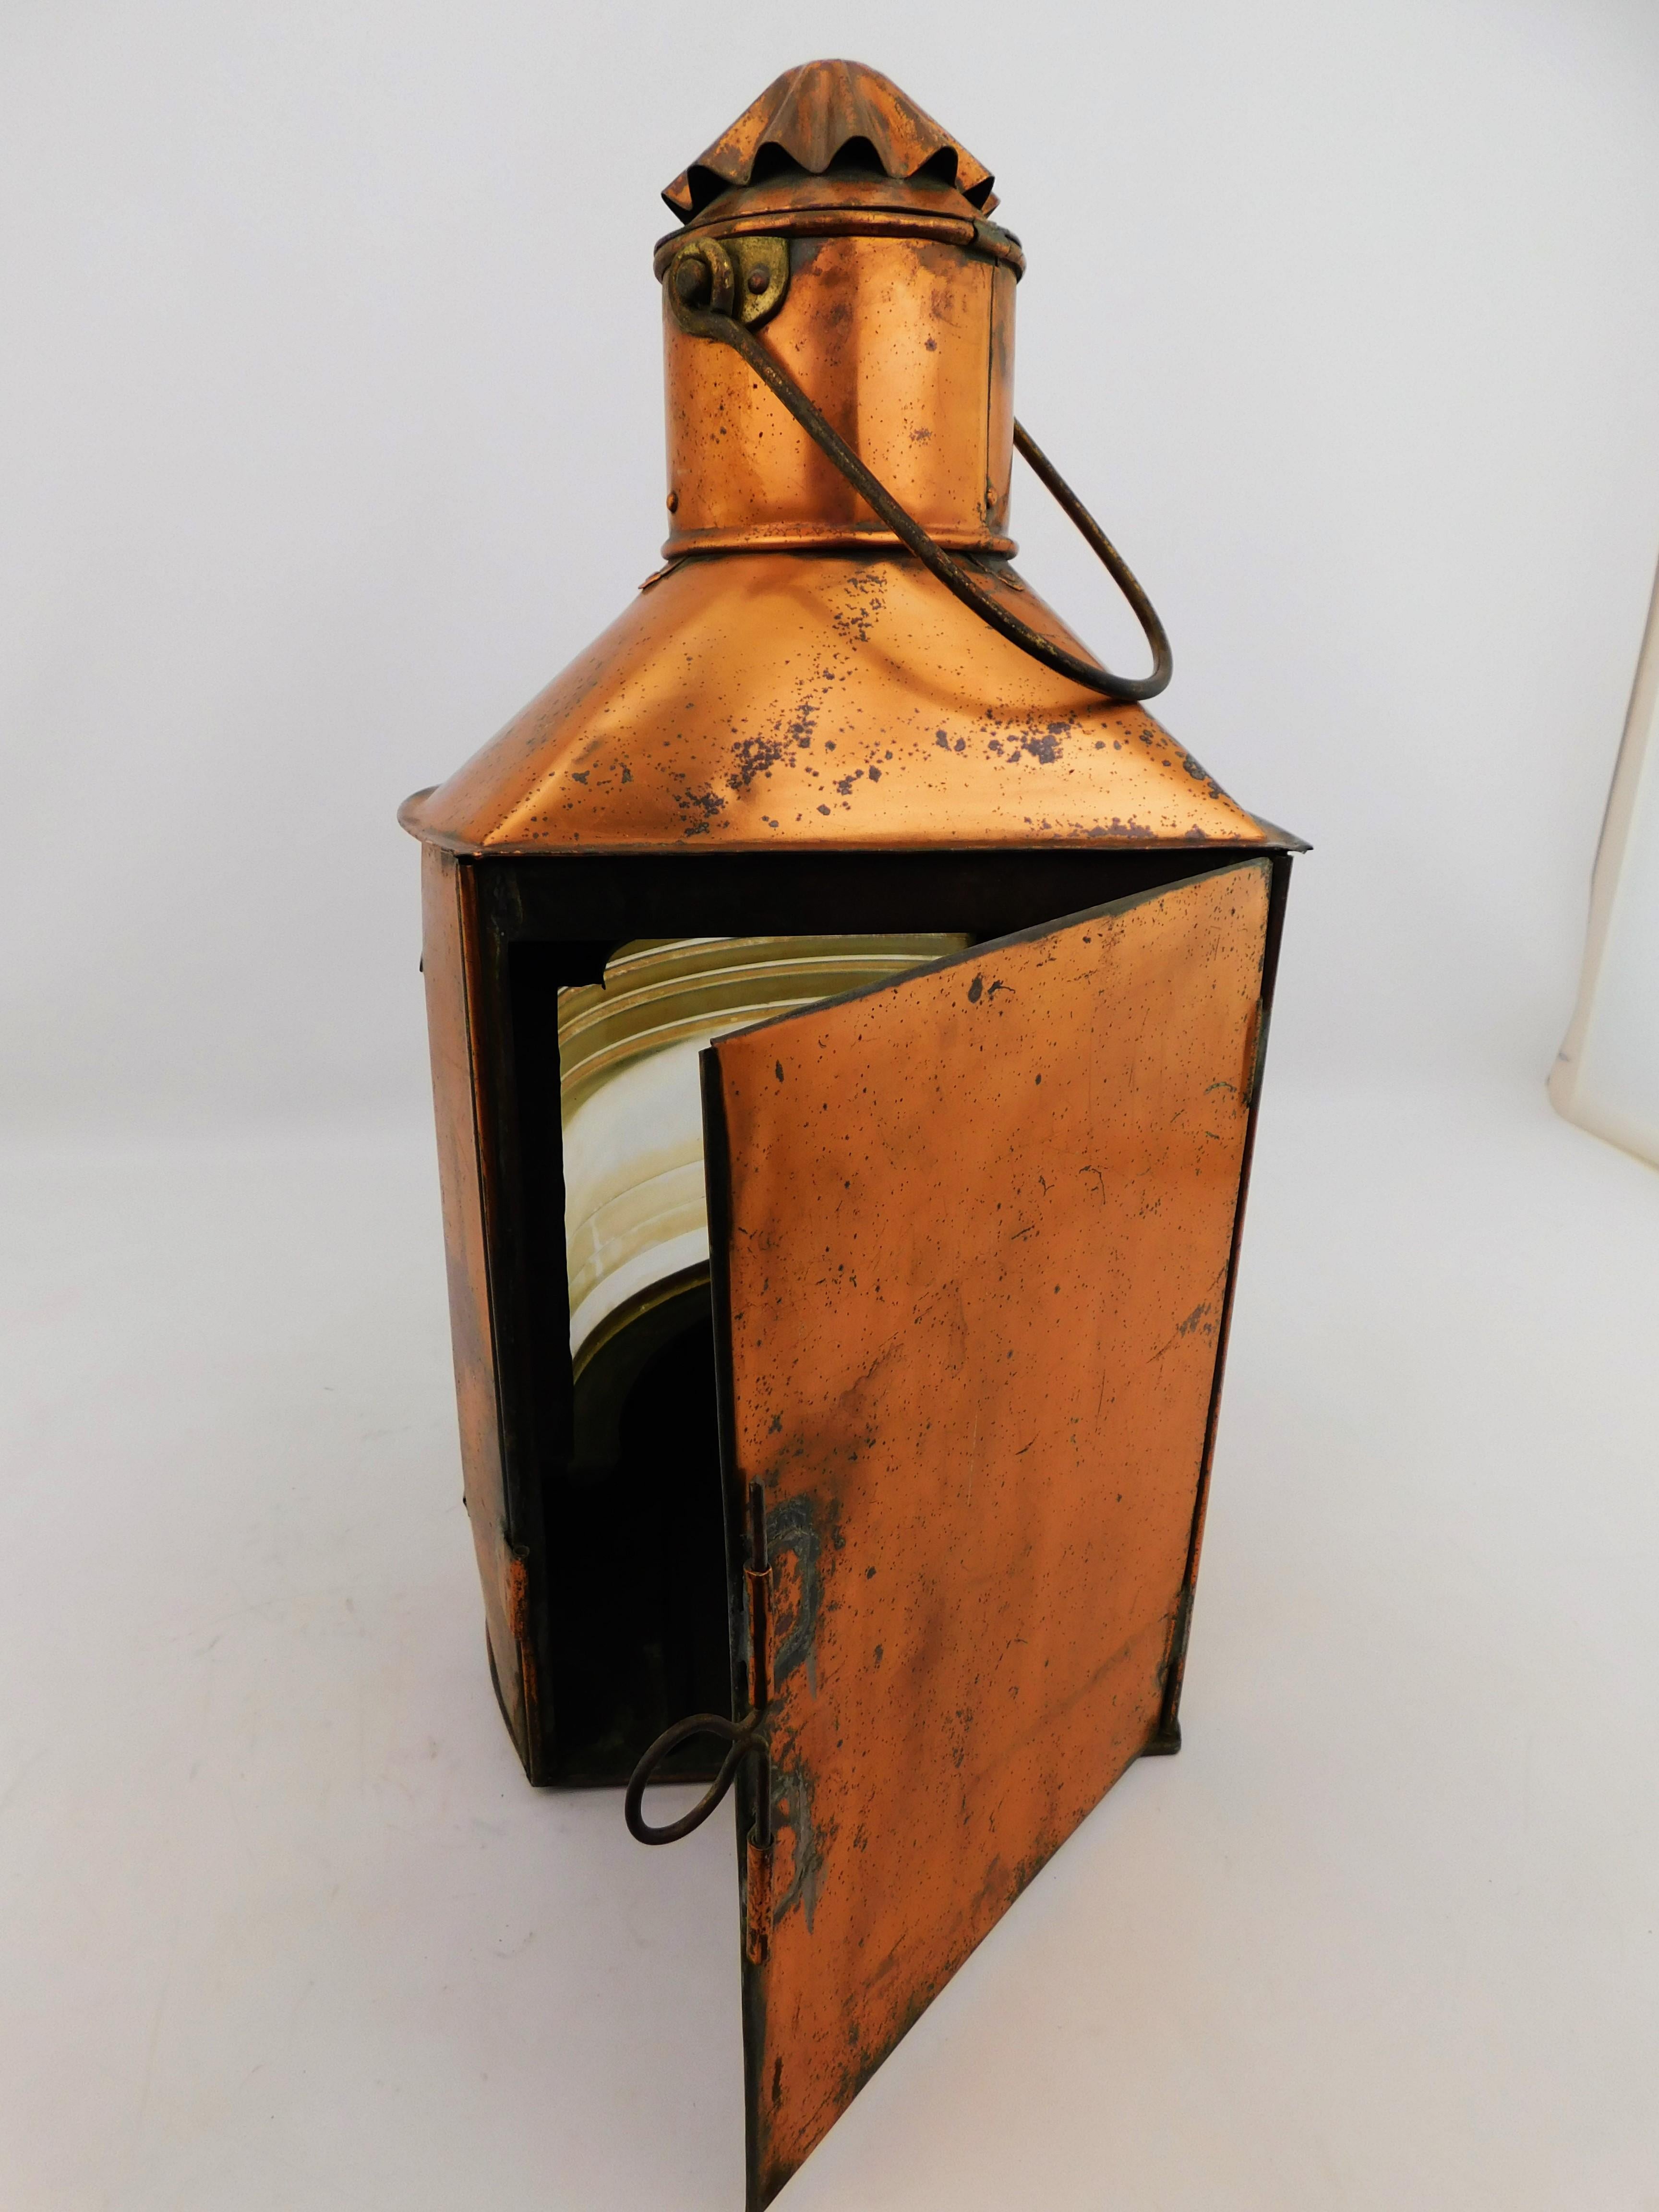 Large Copper and Brass Ship's Port Lantern Light by Meteorite Birmingham England In Fair Condition For Sale In Hamilton, Ontario